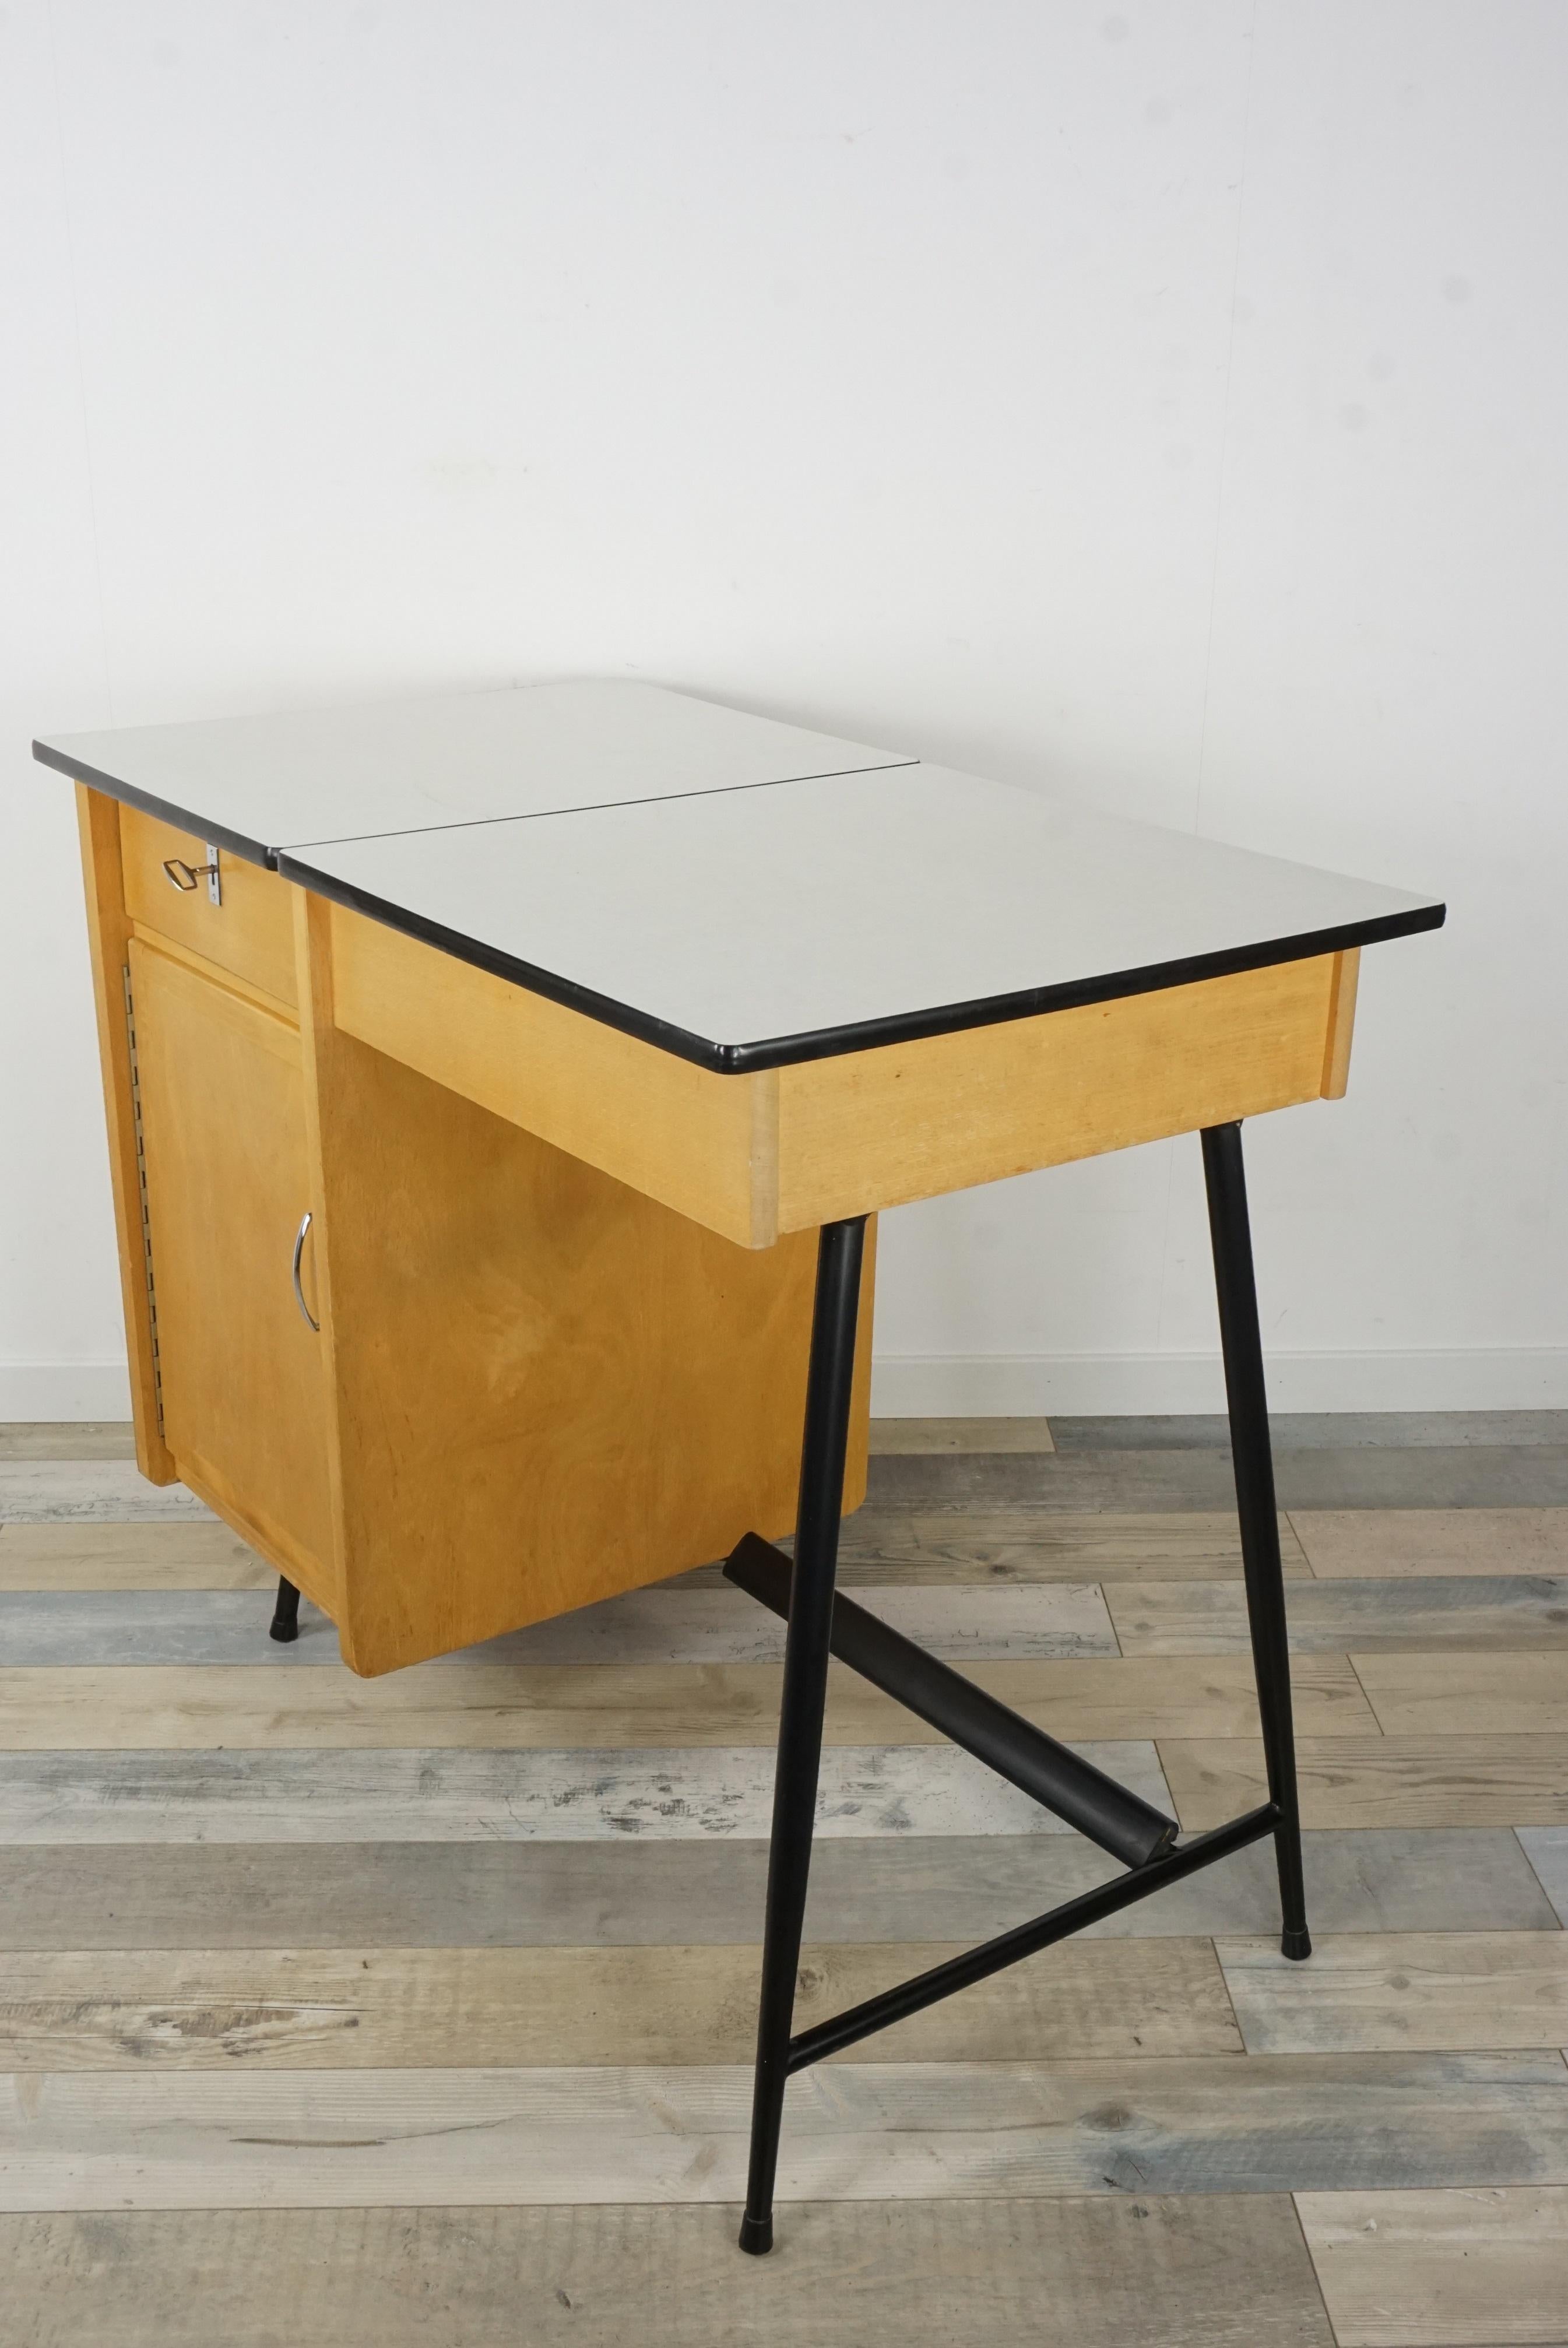 1950s design little desk is composed of black metal compass feet, wooden structure and formica sectional tray.